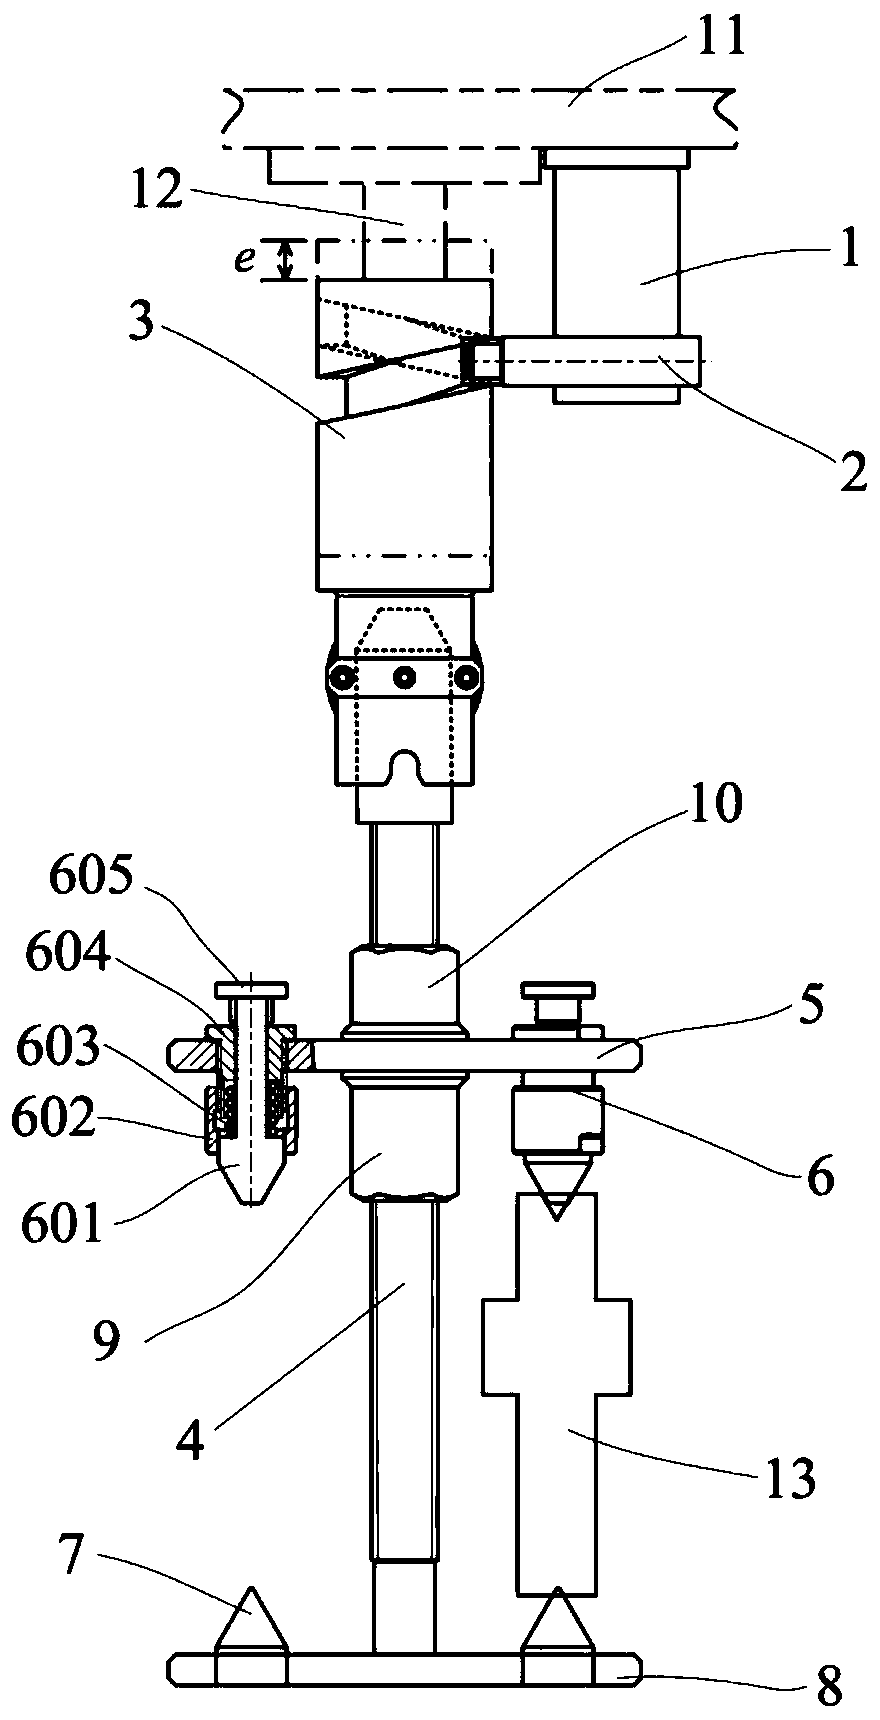 Oil pump gear shaft swirl type barrel grinding finishing tooling device and method